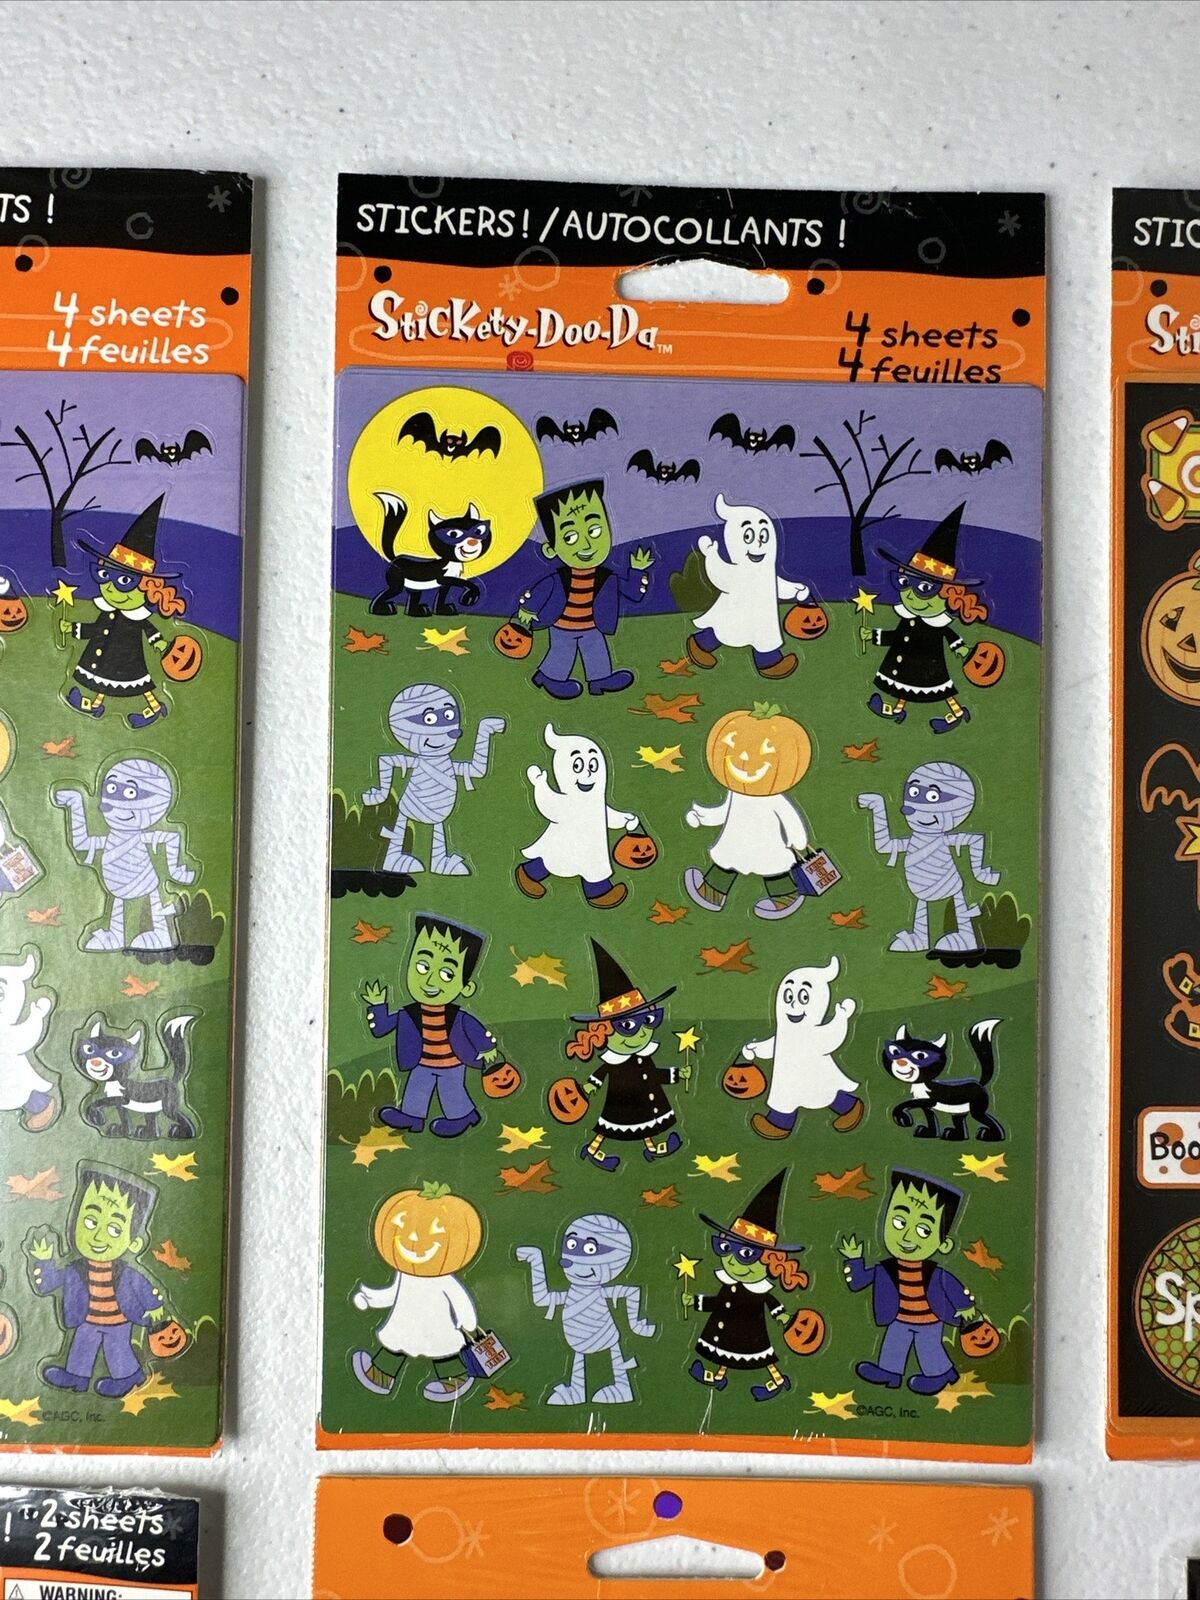 Set of Vintage Halloween Stickers by American Greetings and Stickety-Doo-Da - Retro Collectible Lot - TreasuTiques